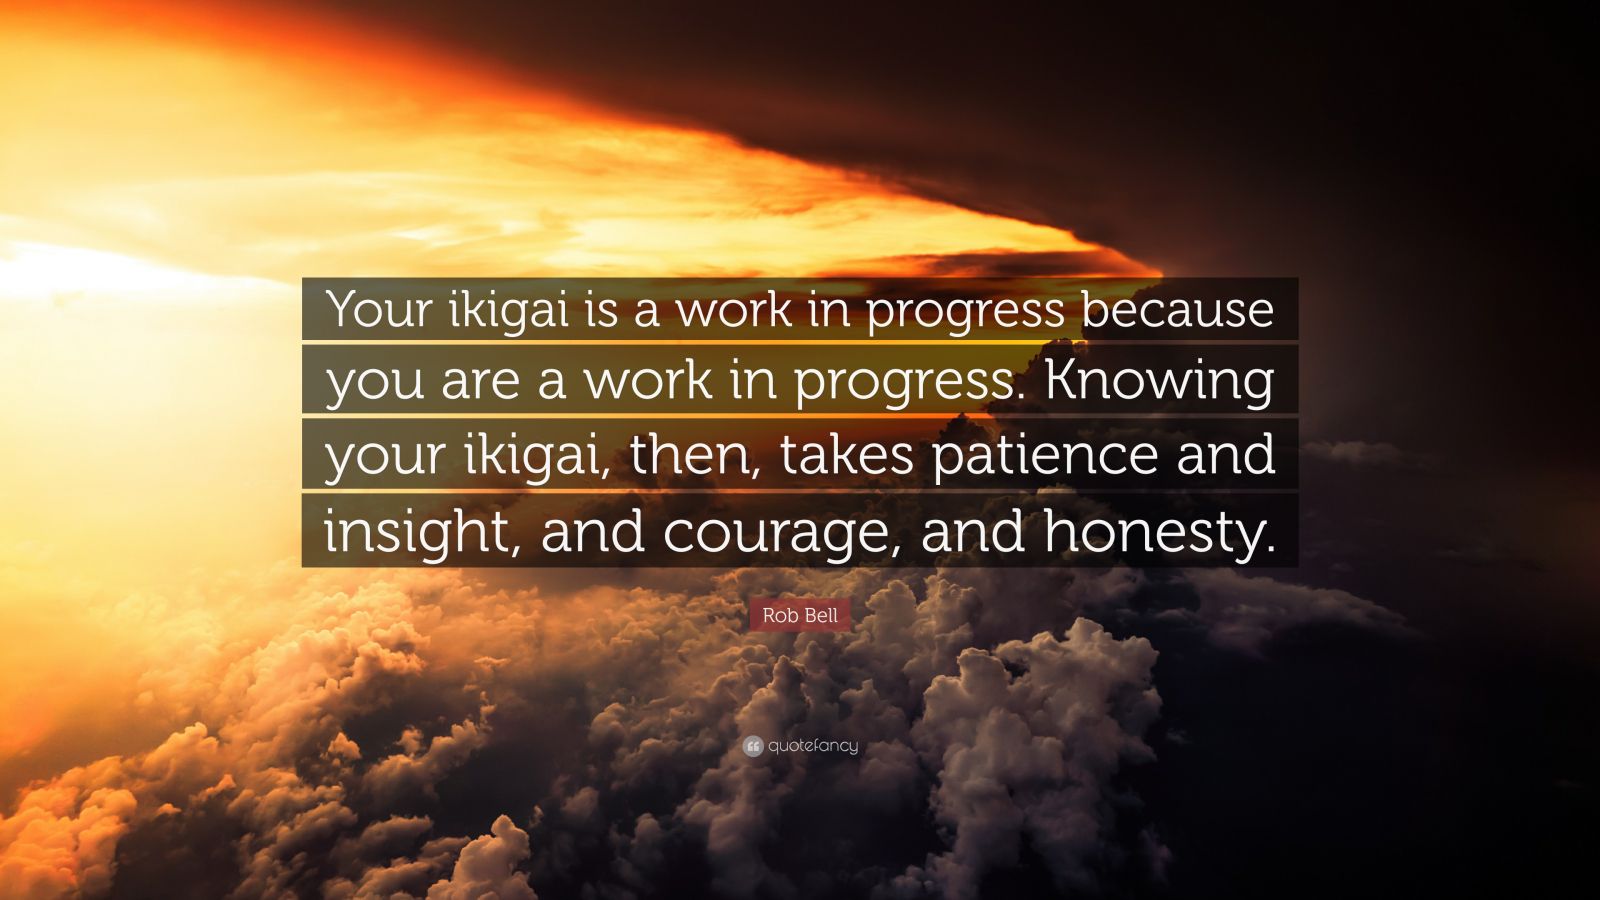 Rob Bell Quote: “Your ikigai is a work in progress because you are a work in progress. Knowing your ikigai, then, takes patience and insi.”